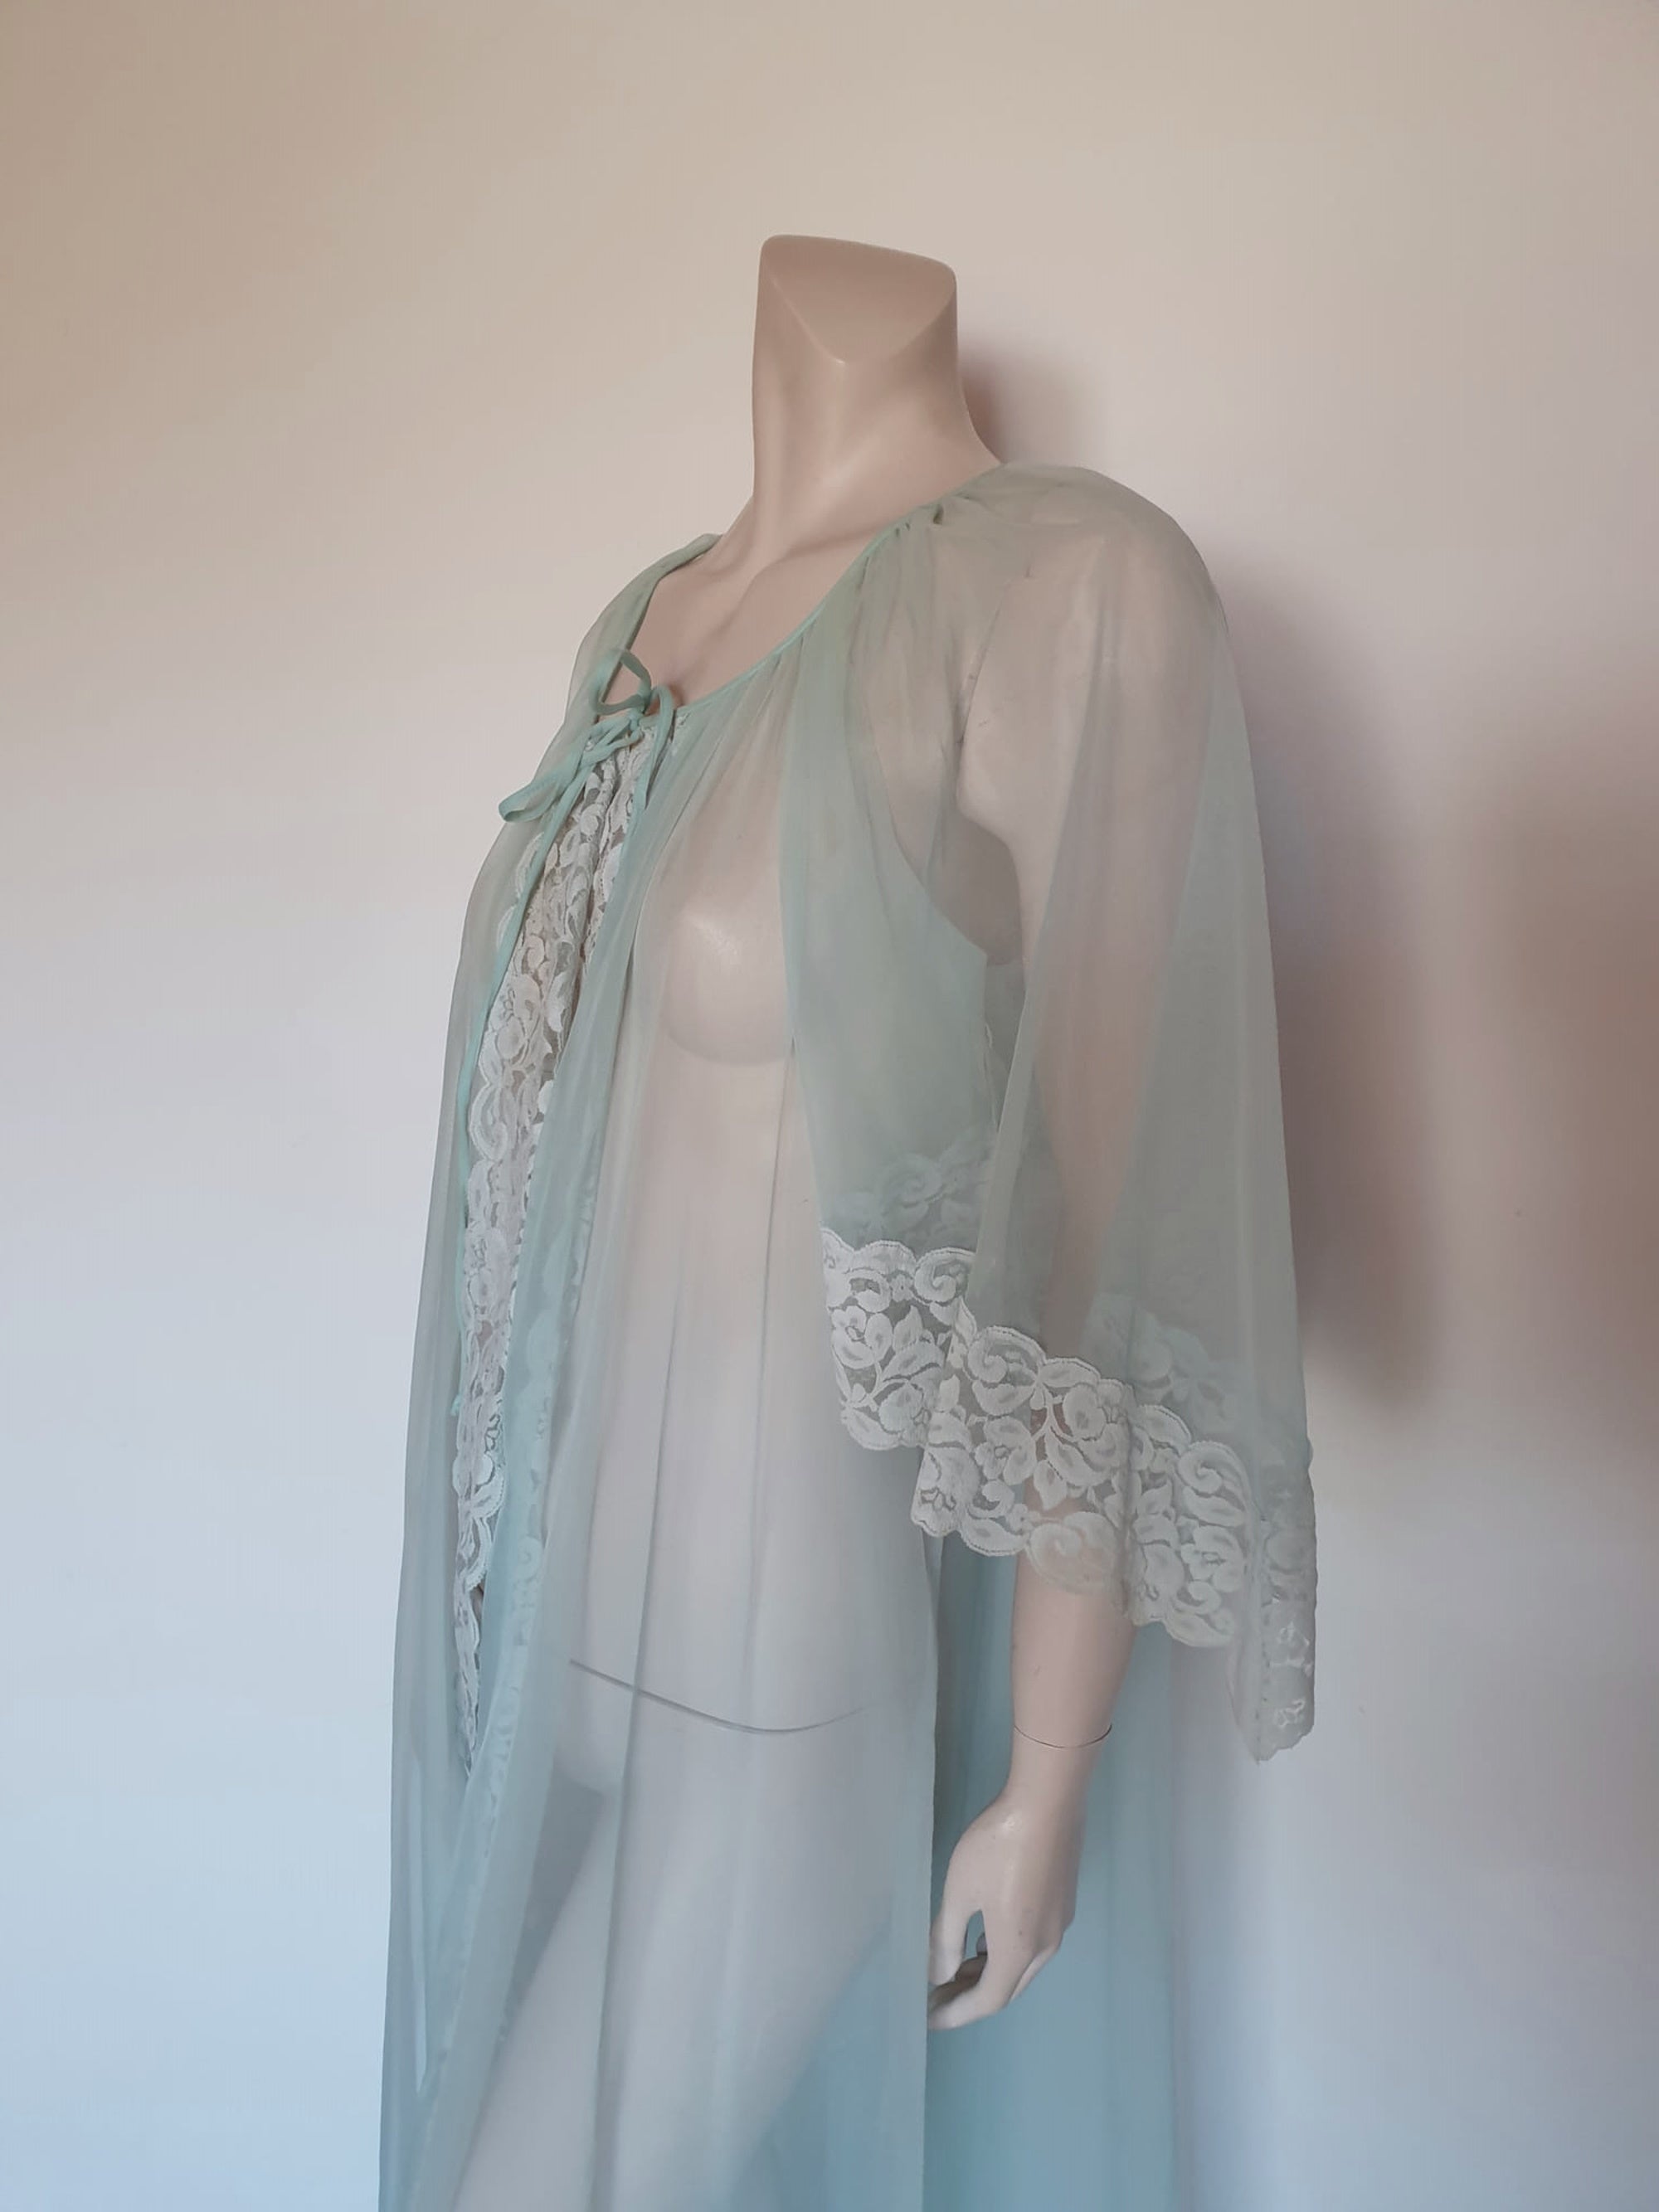 vintage sheer blue peignoir with V sleeves and white lace by JC Penney Large